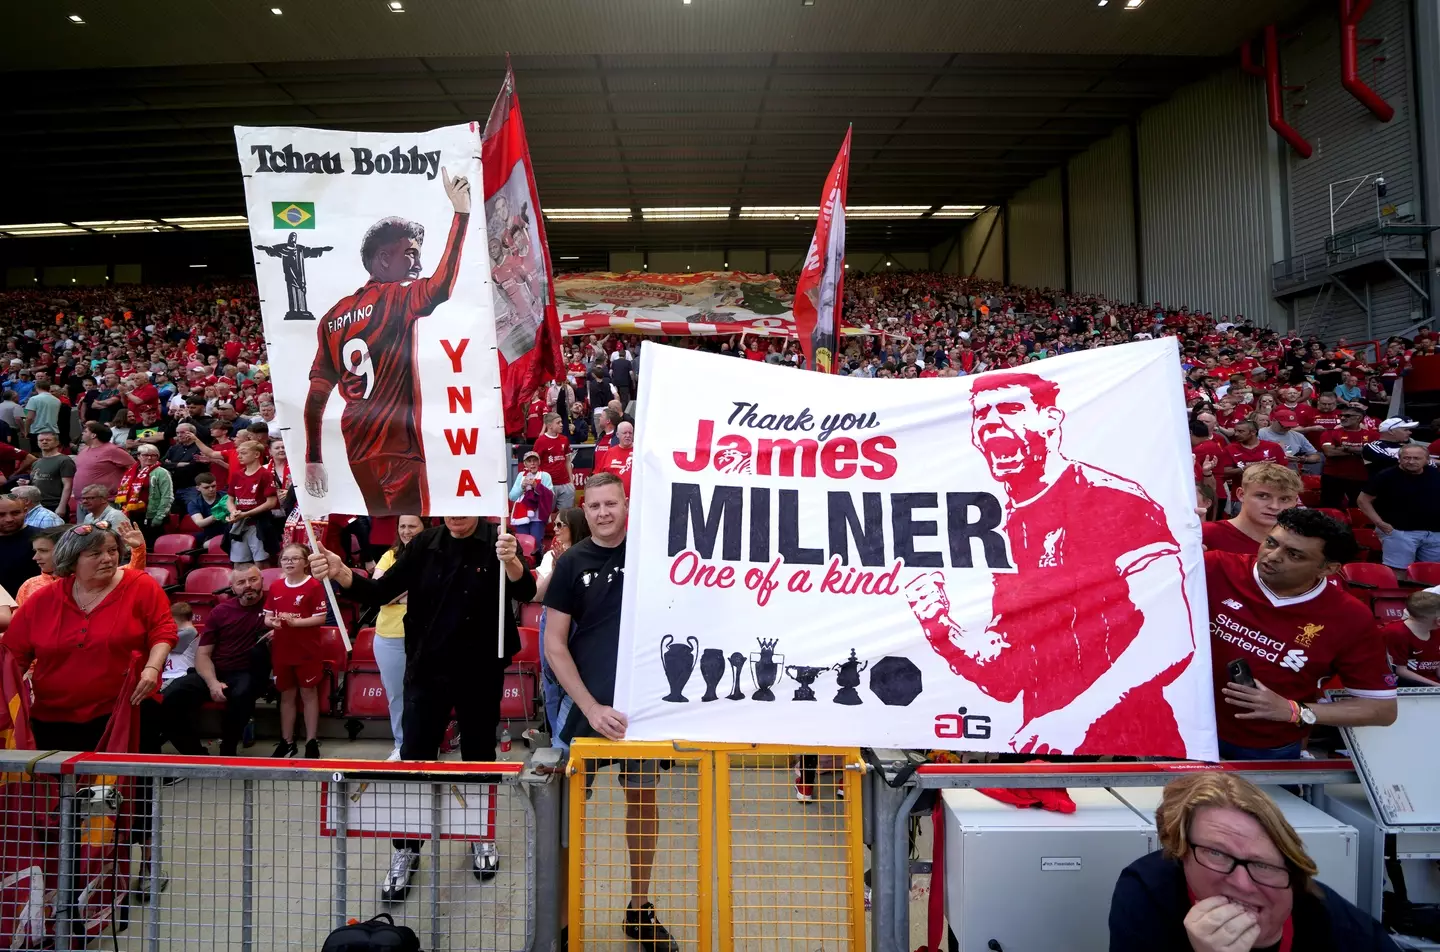 Fnas held up banners for James Milner and Roberto Firmino in the final home game of the season, with both set to leave this summer. (